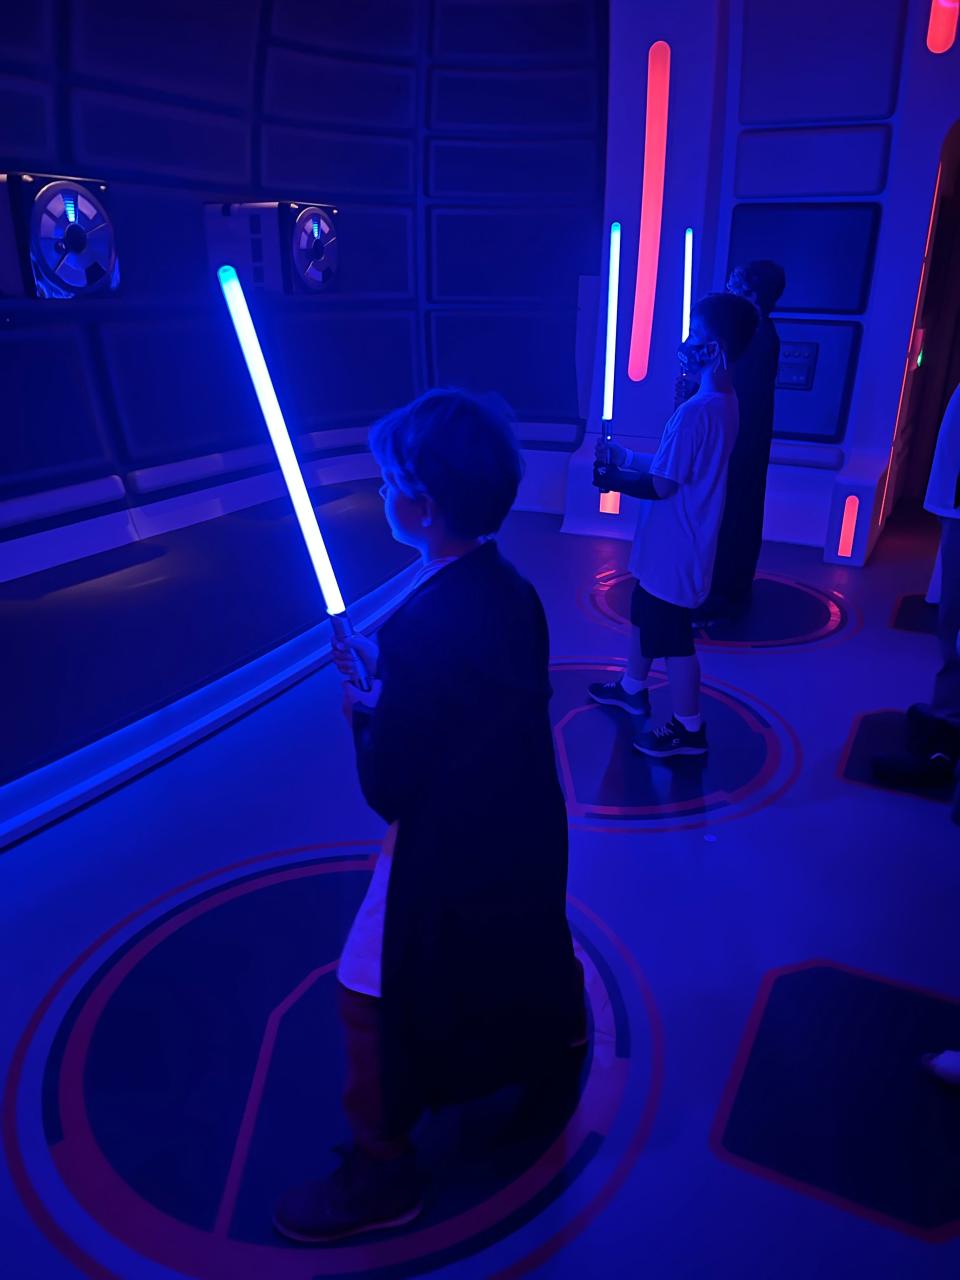 My son with a lightsaber at the training in a blue-lit room on the starcruiser